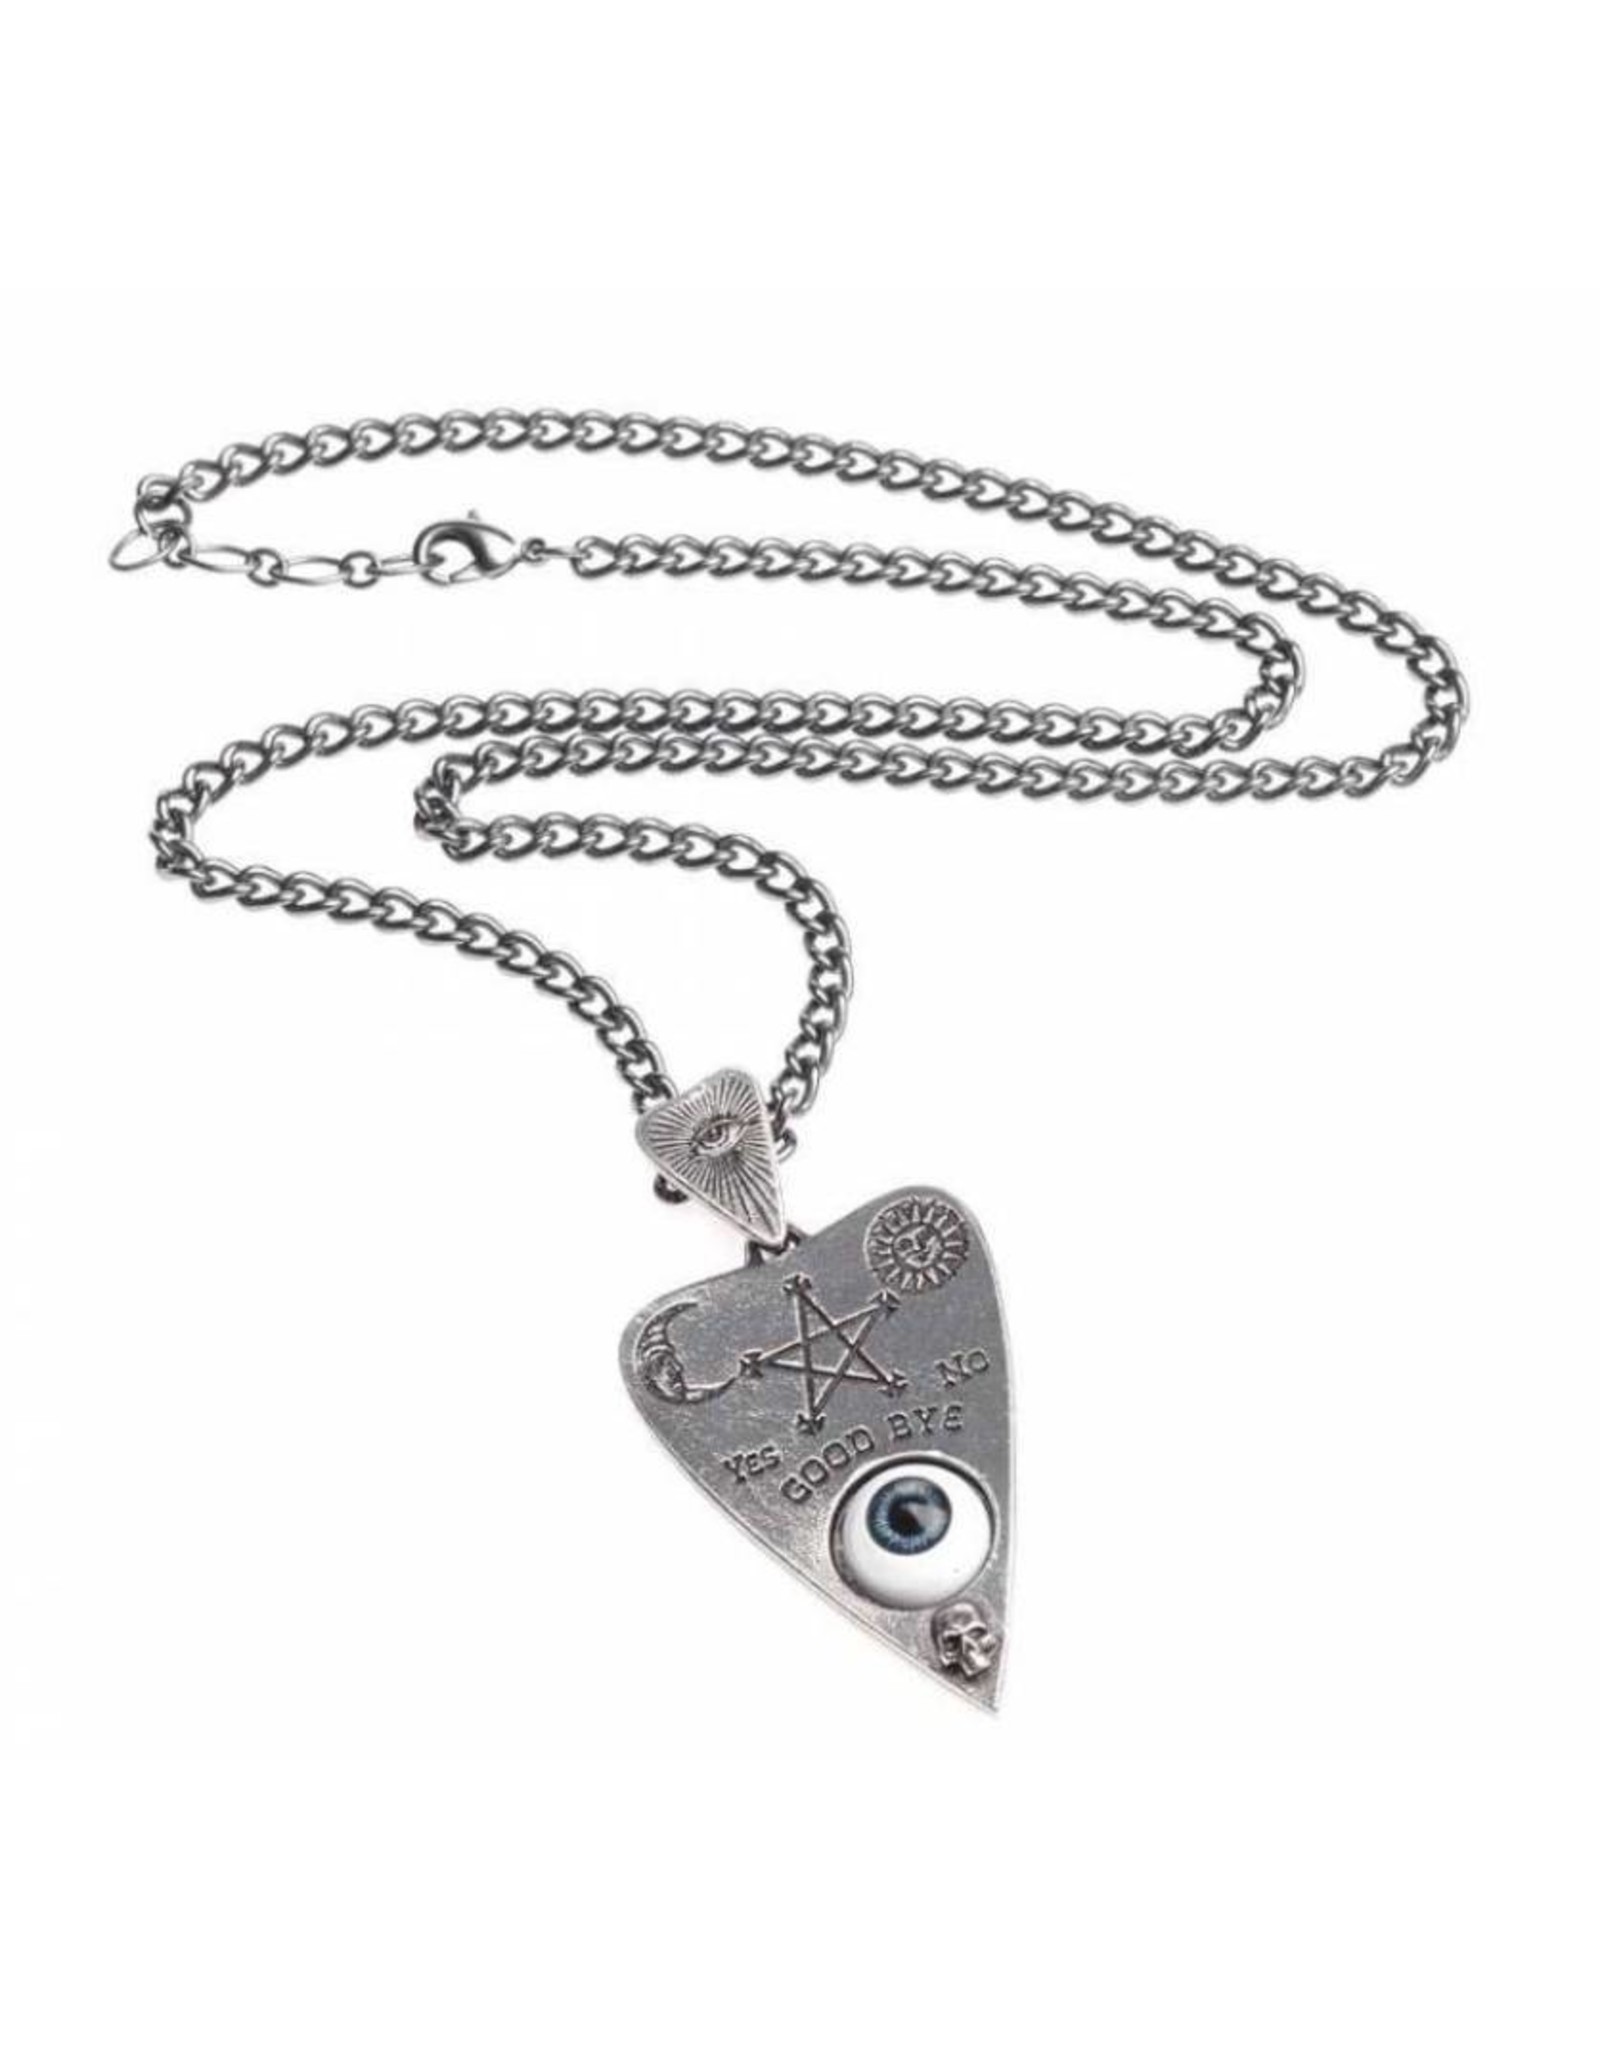 Alchemy Wicca and Occult  jewellery - Planchette pendant and chain Alchemy